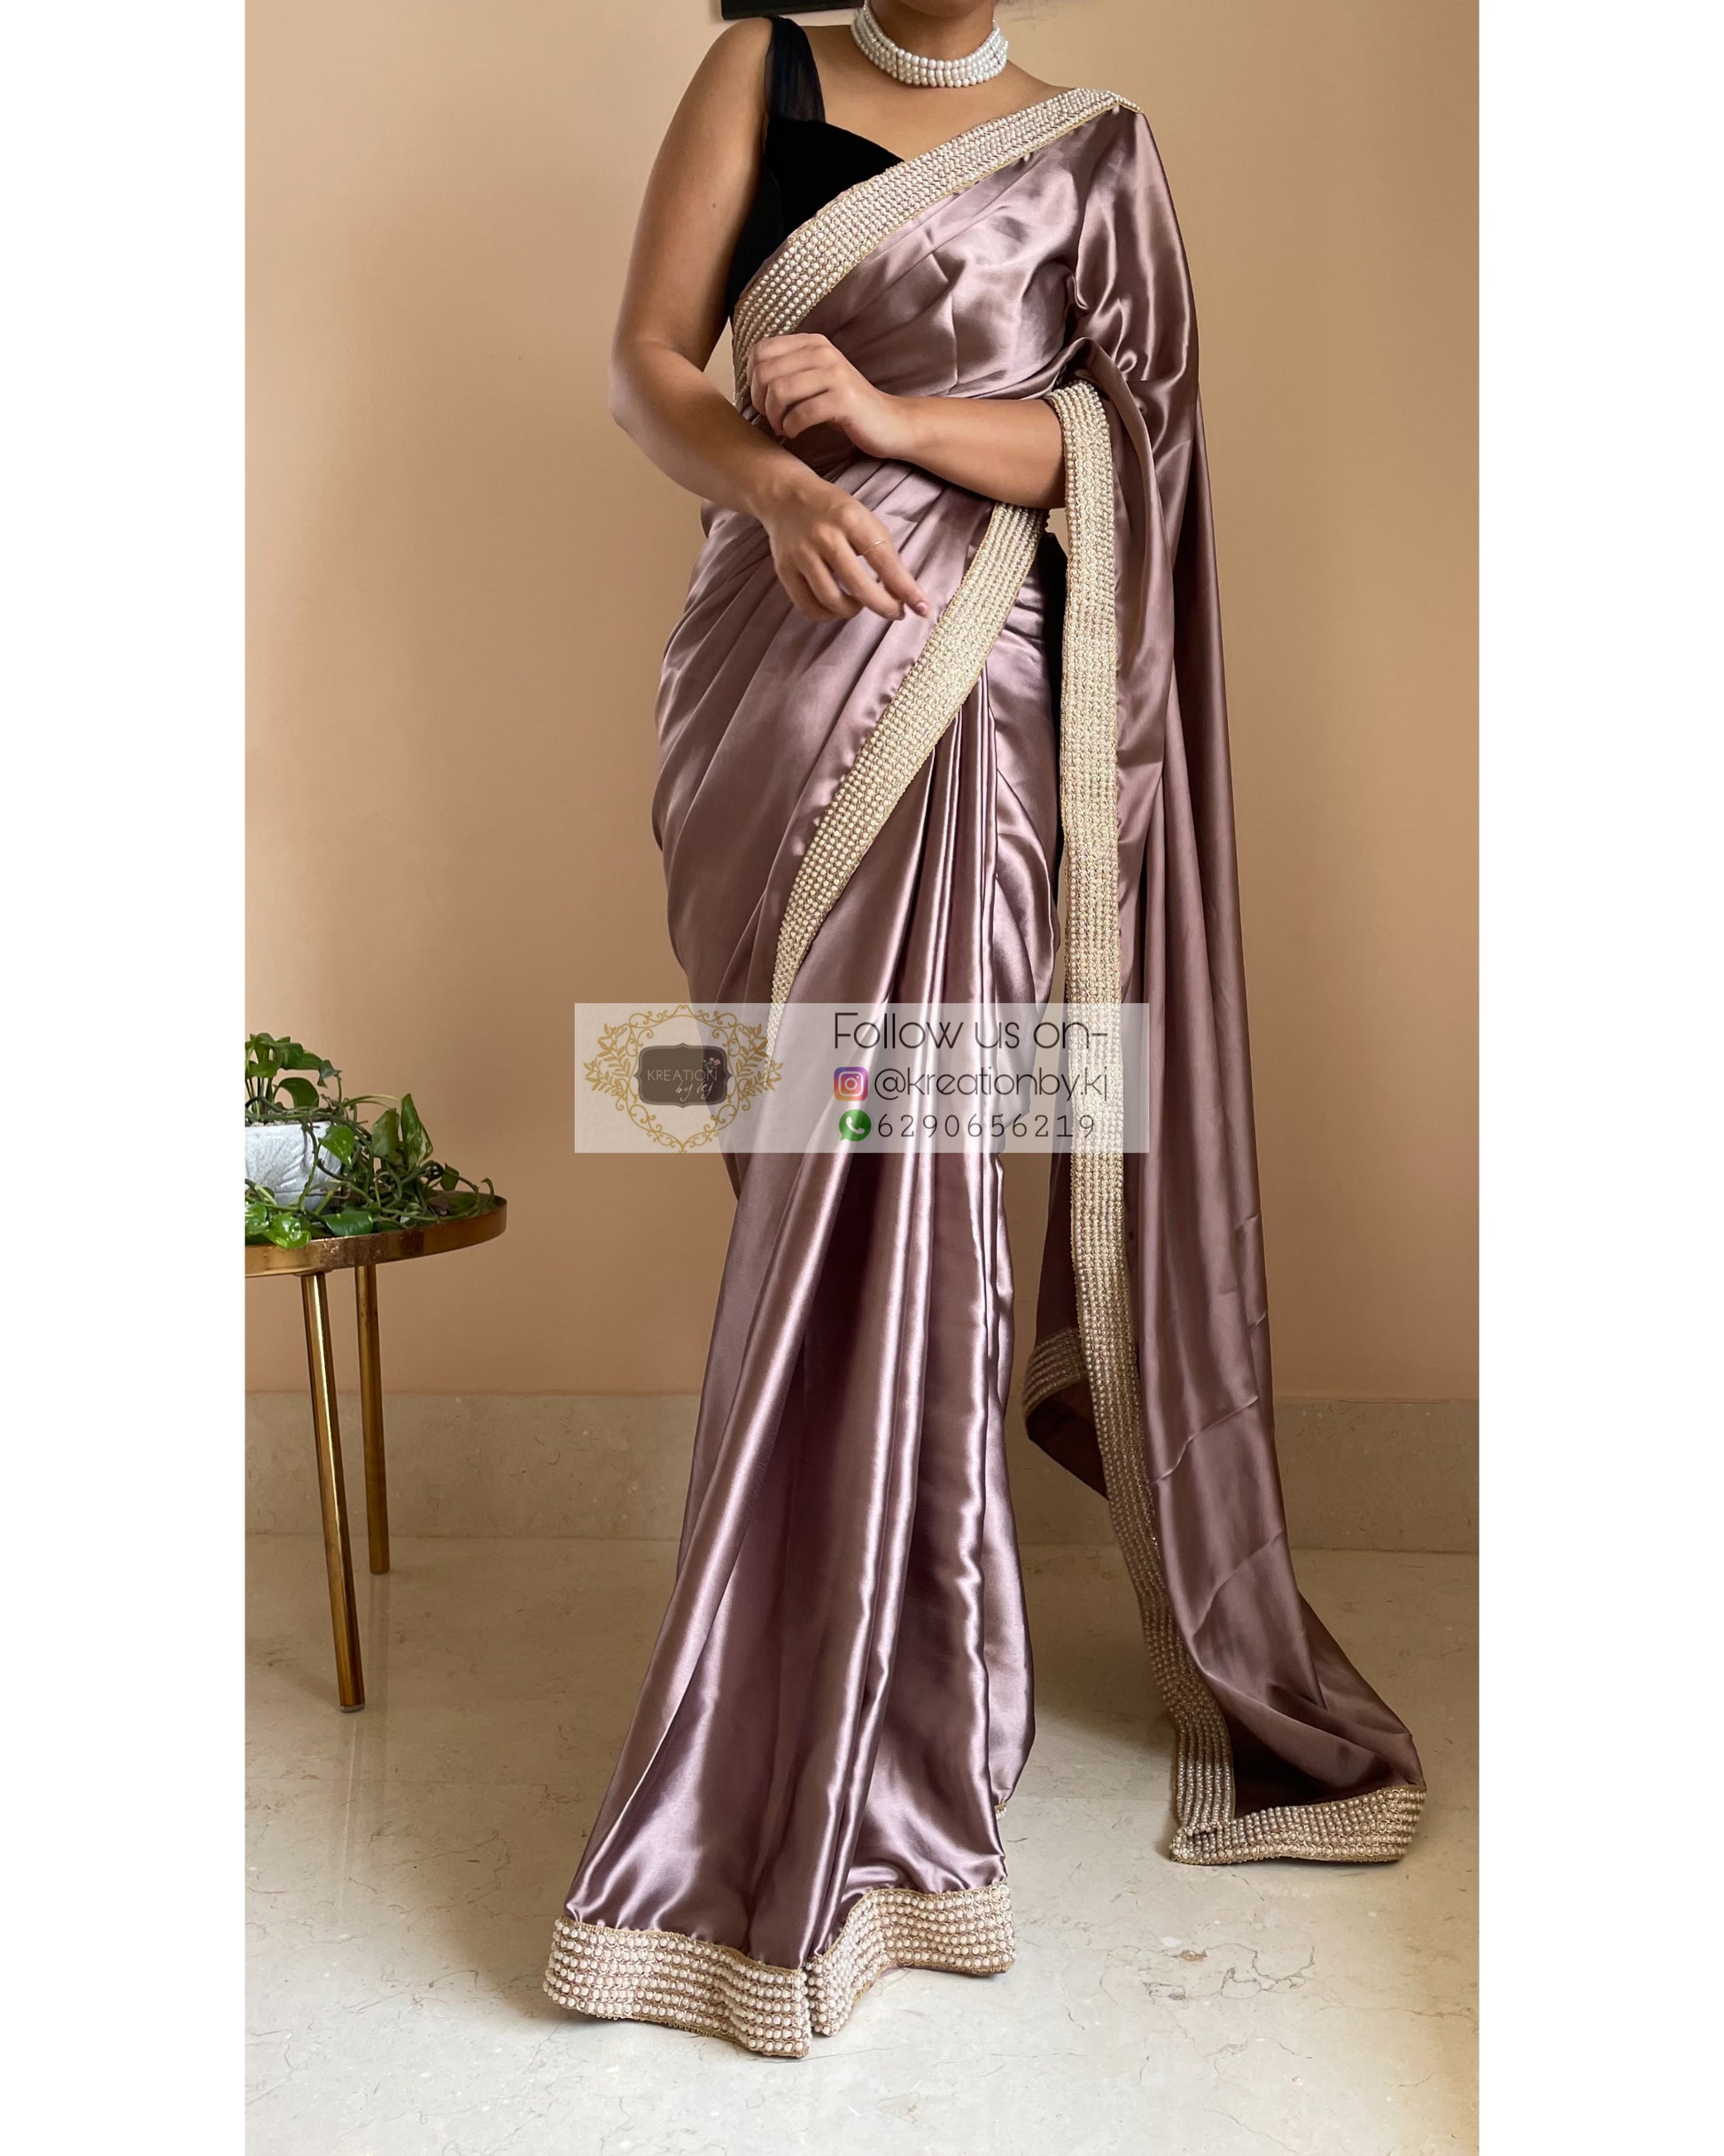 Dusty Mauve Mother Of Pearl Saree - kreationbykj